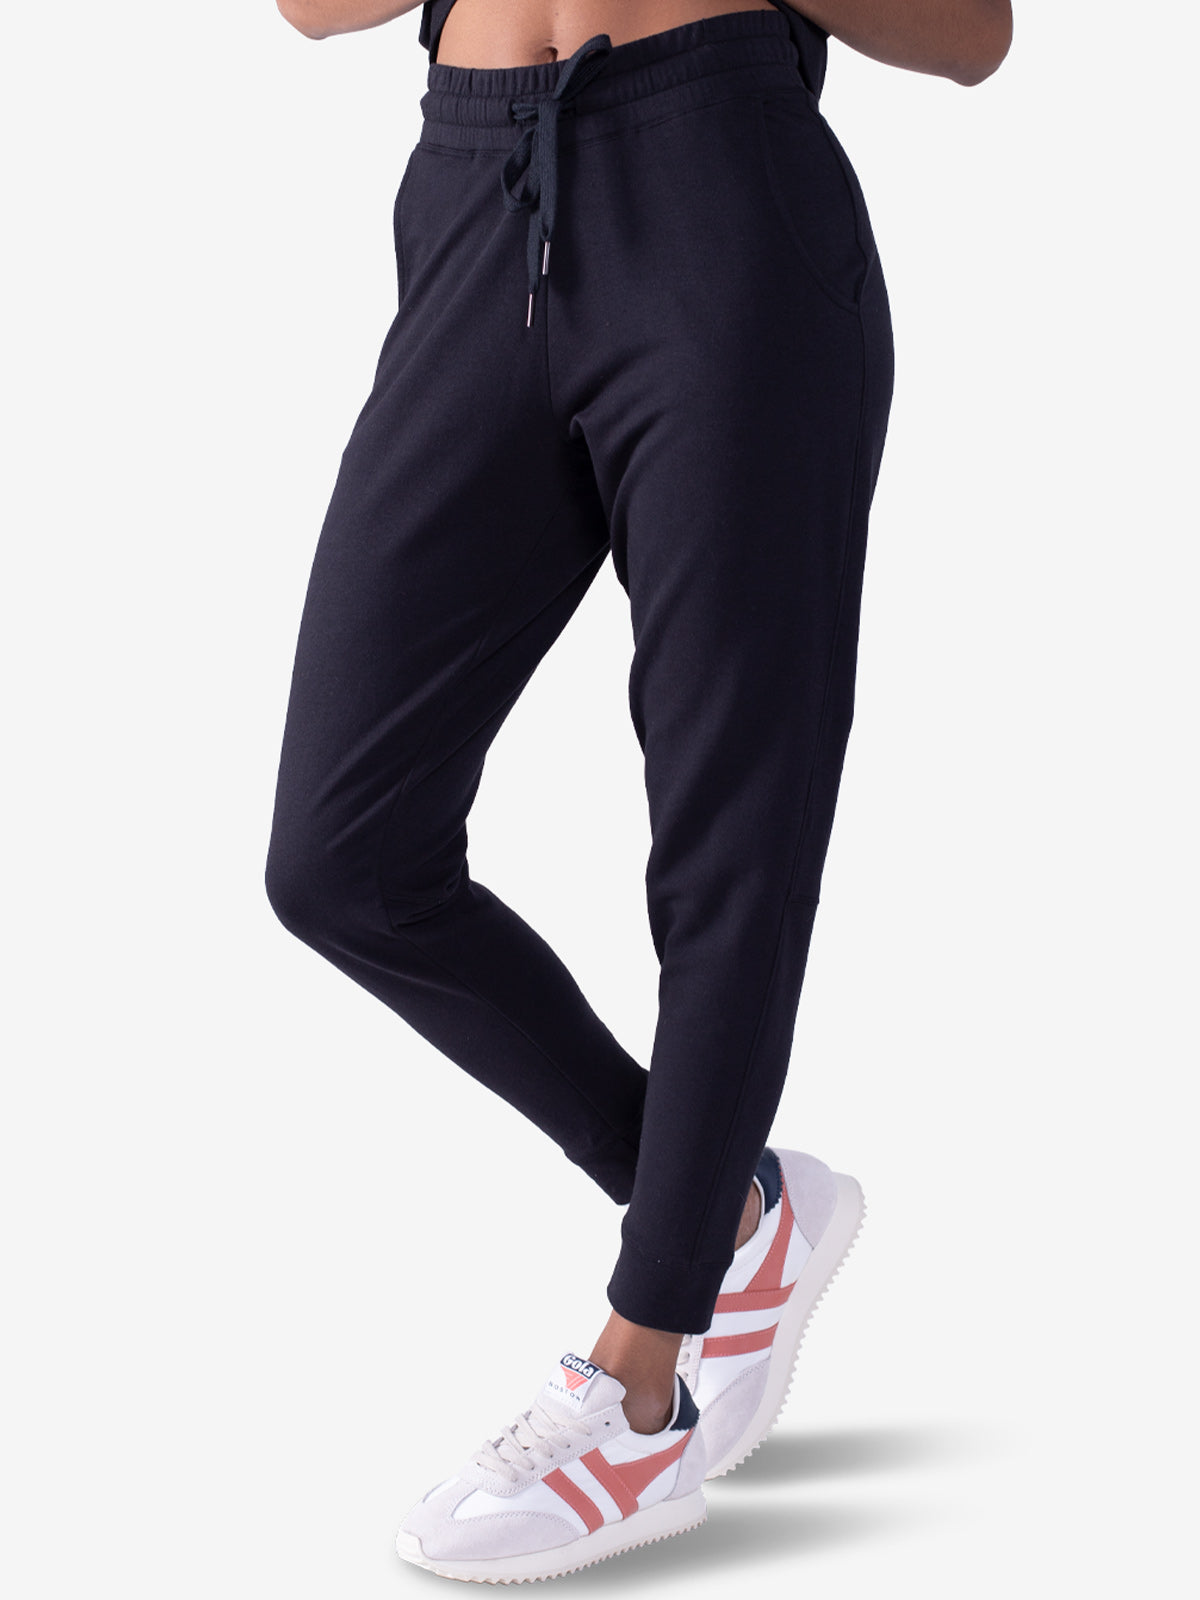 THE GYM PEOPLE Women's Joggers Pants Lightweight India